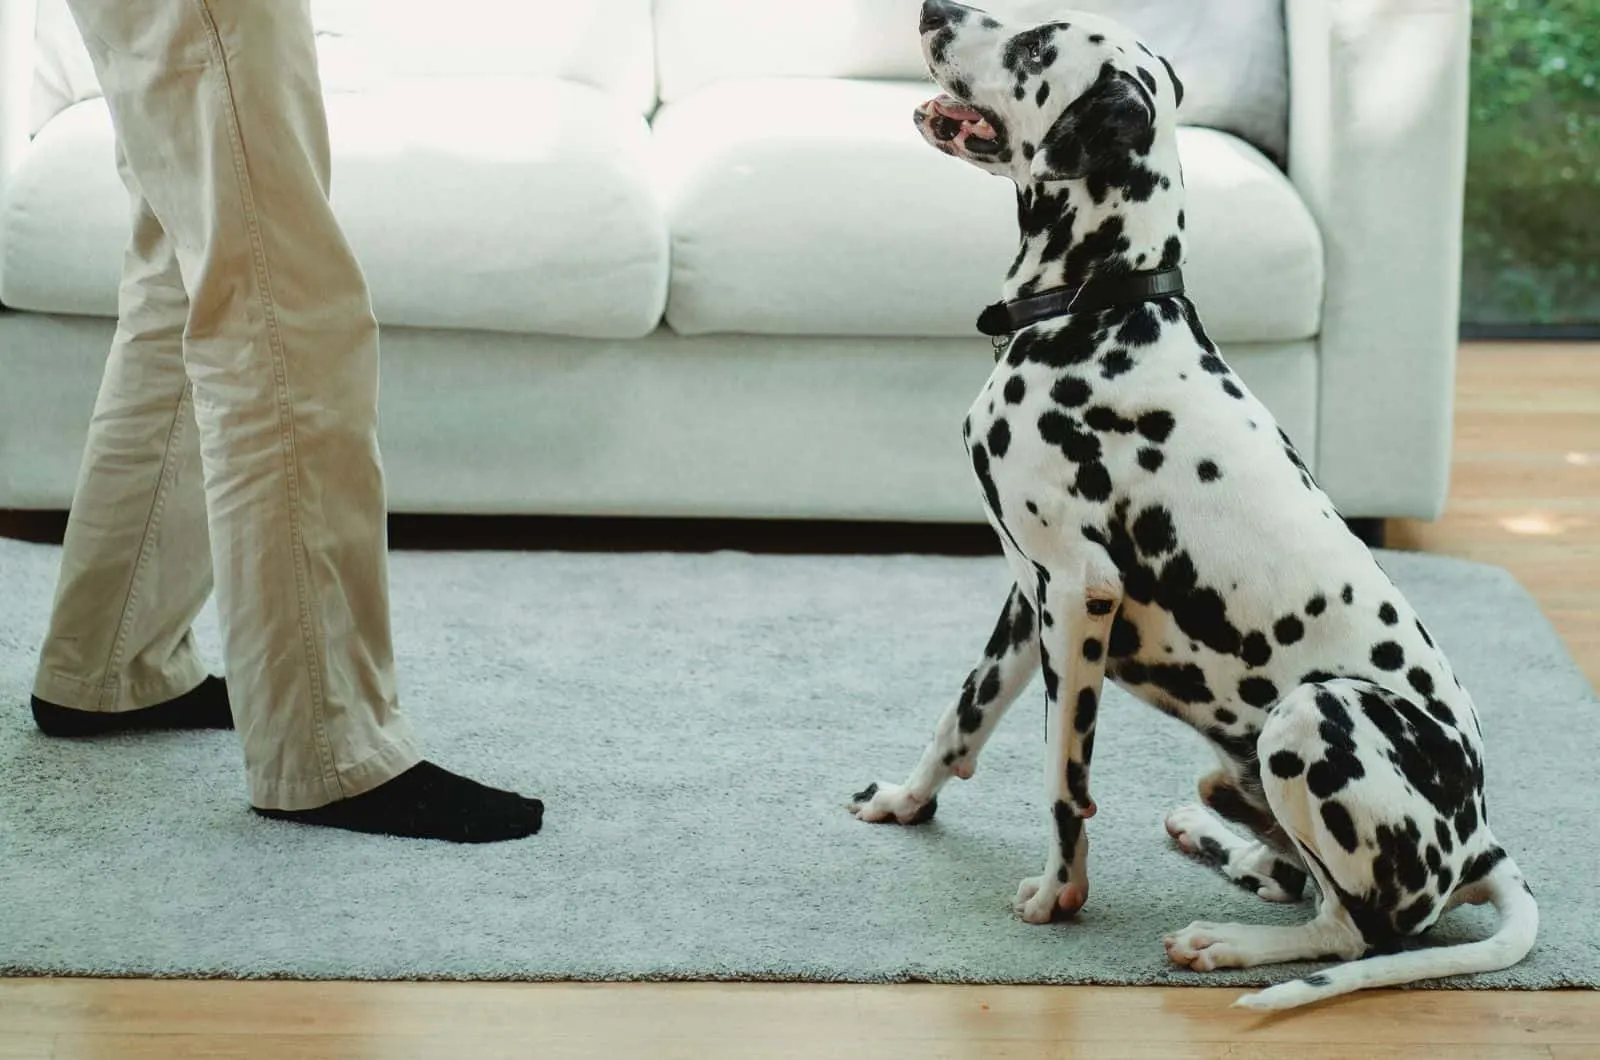 Dalmatian playing with owner